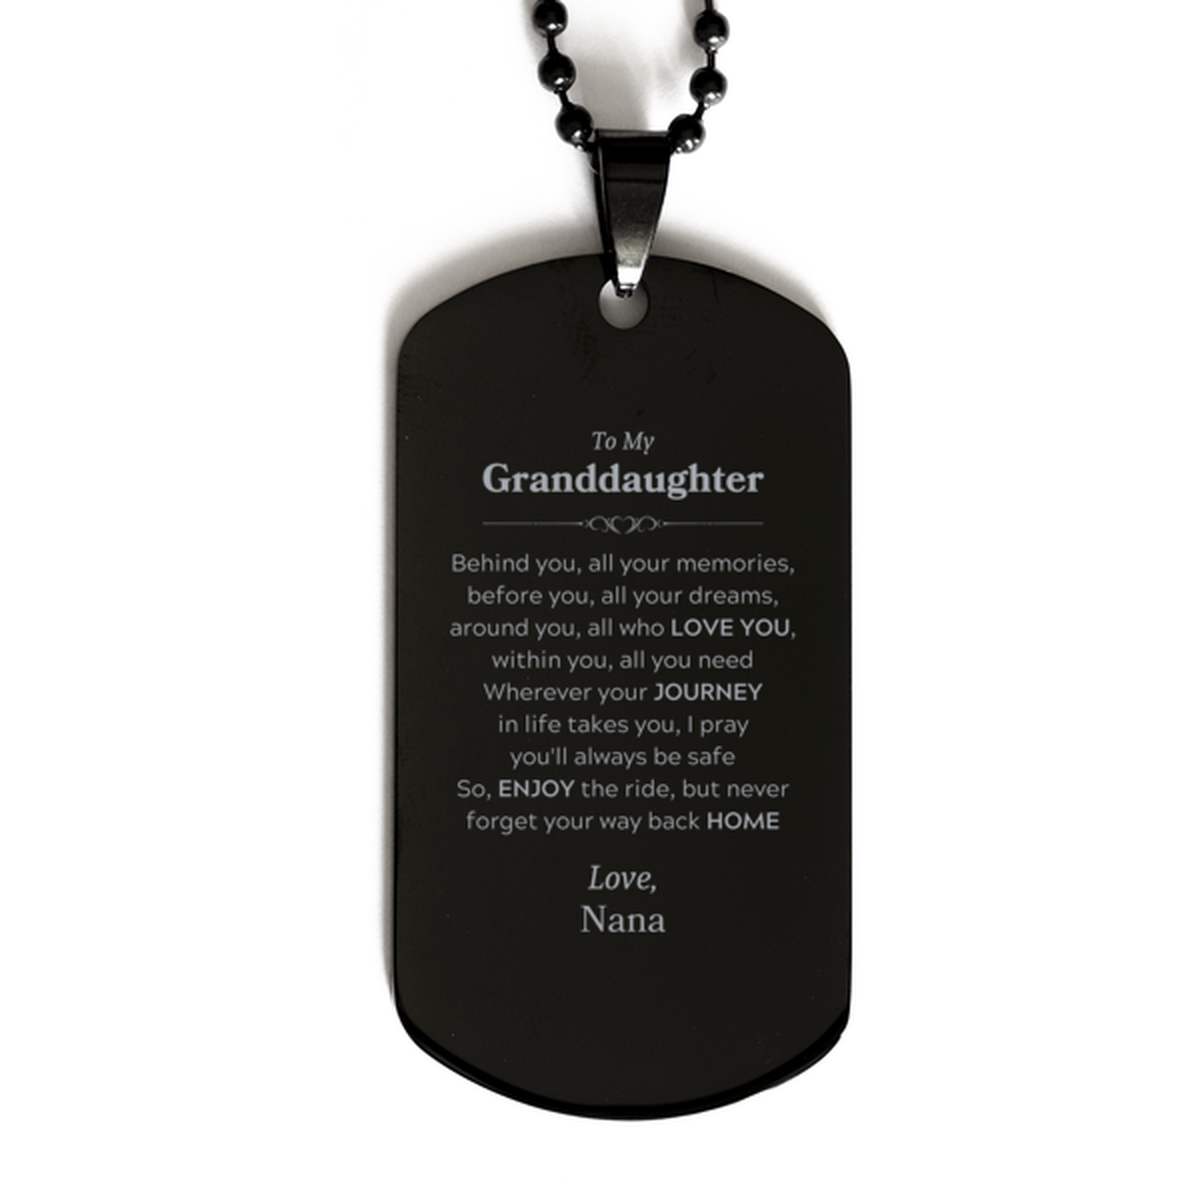 To My Granddaughter Graduation Gifts from Nana, Granddaughter Black Dog Tag Christmas Birthday Gifts for Granddaughter Behind you, all your memories, before you, all your dreams. Love, Nana